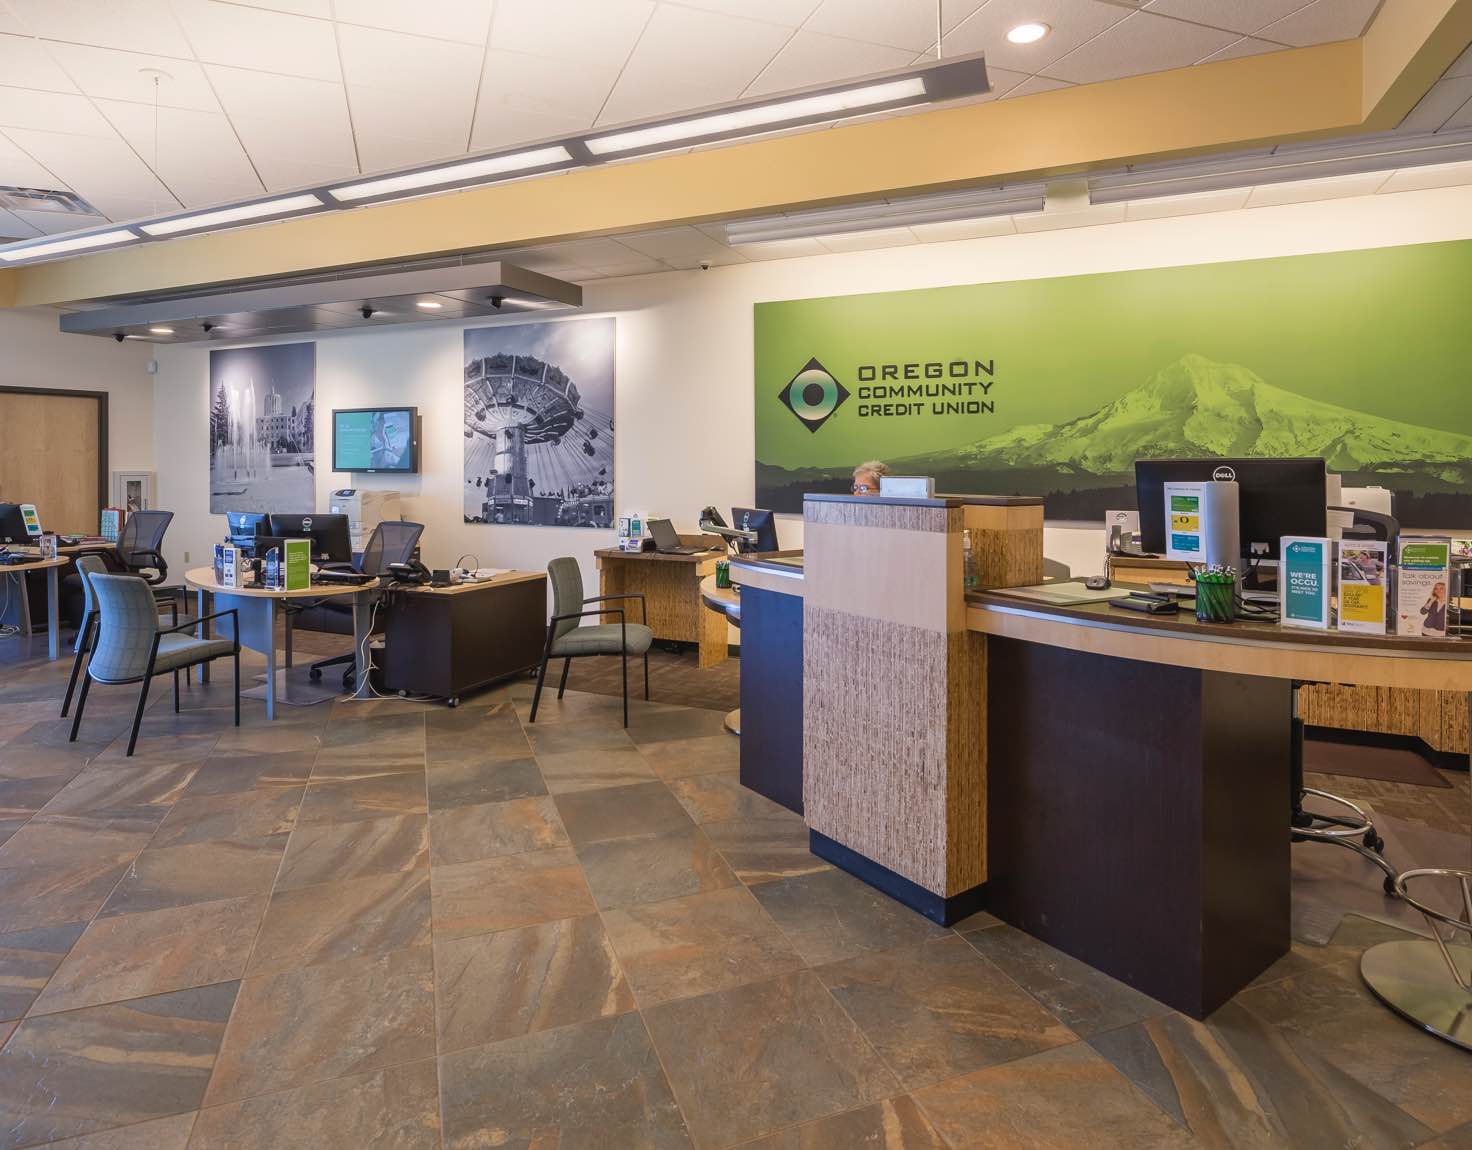 A bank lobby with brown tile floors and a green sign displaying a mountain range.